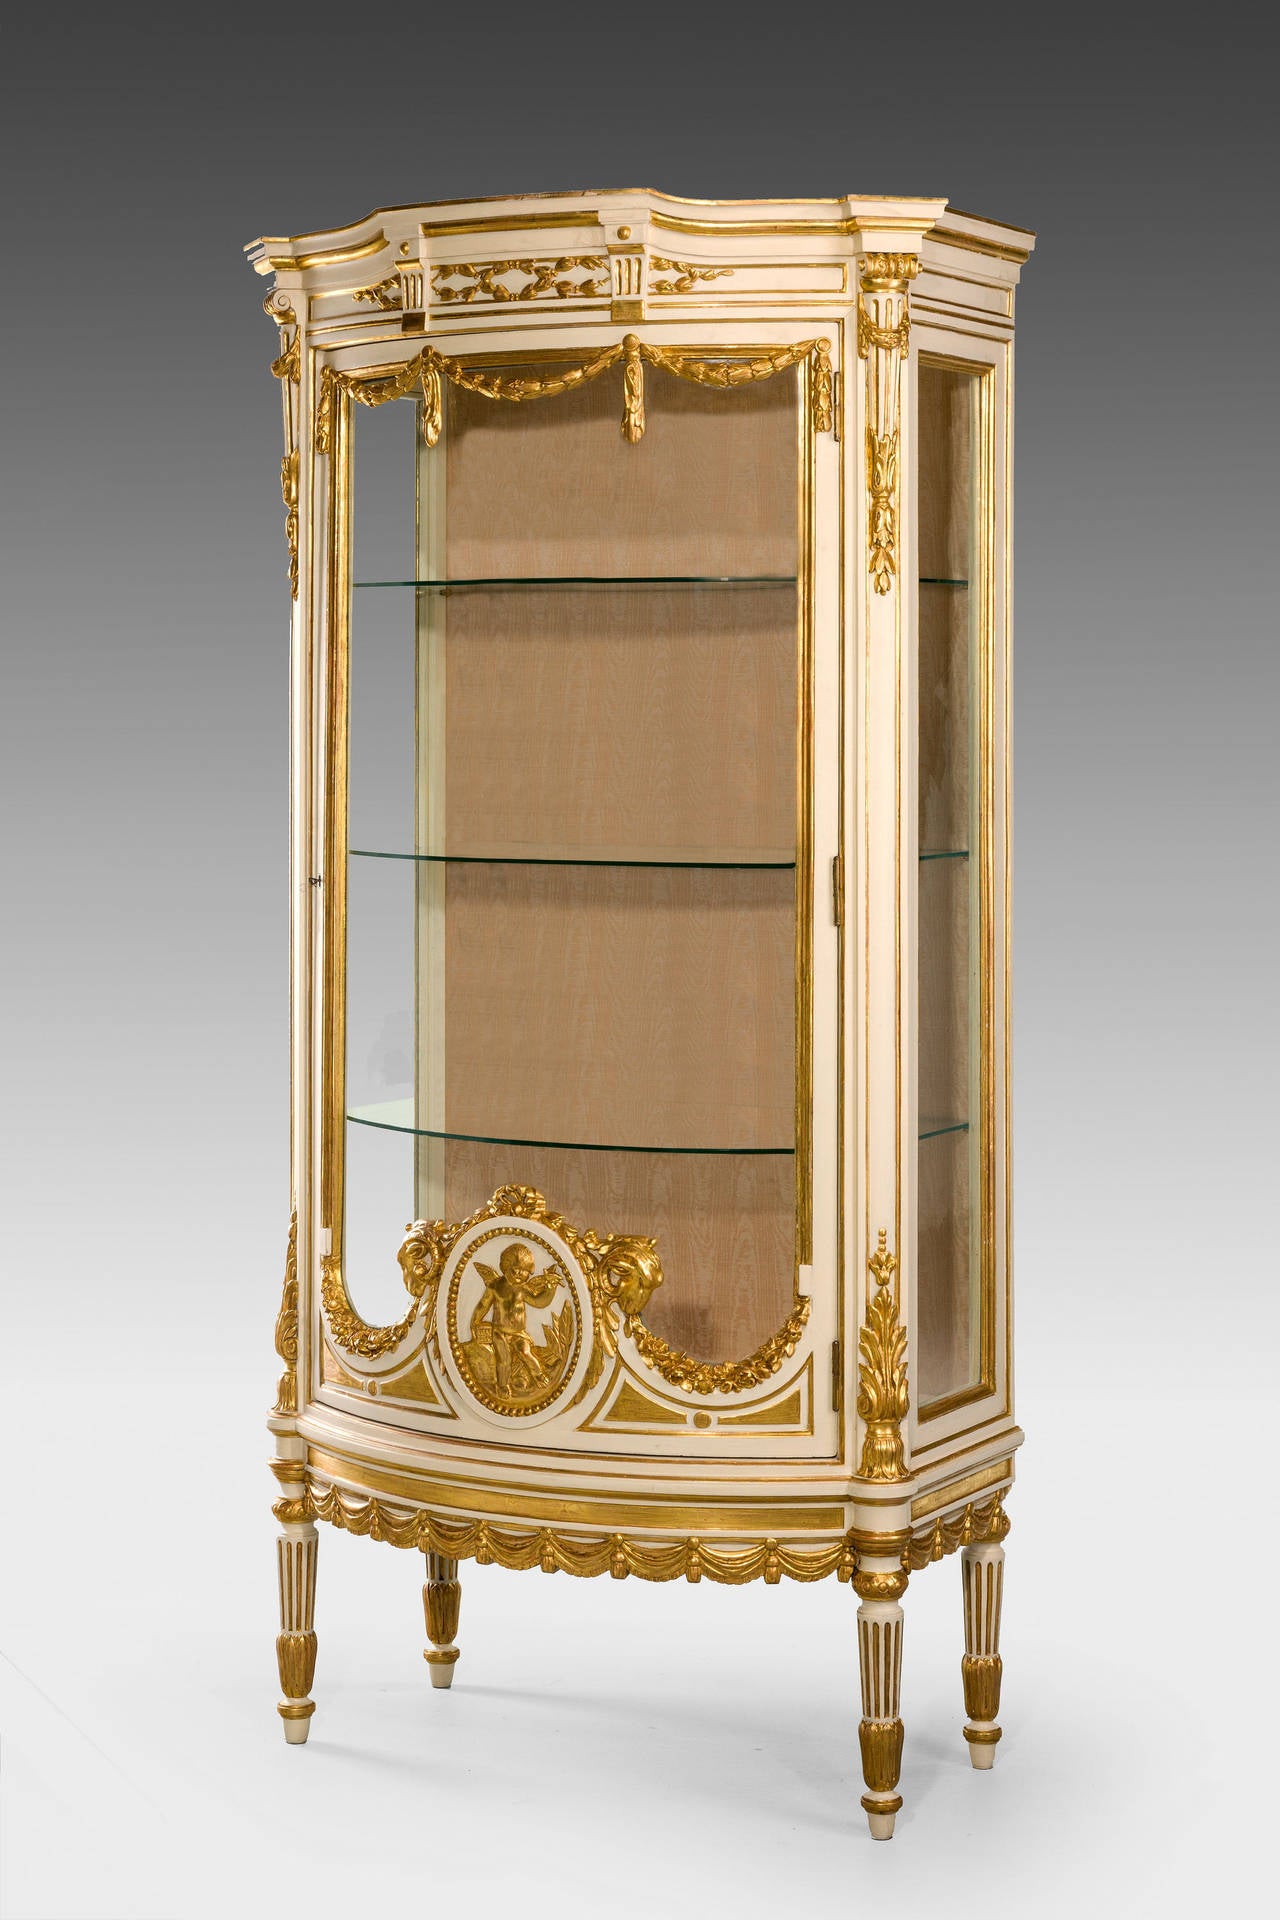 An exceptionally fine 19th Century 'Belle Epoque' China cabinet, soft ivory ground, the finest gilding with 24kt gold leaf, the central cartouche incorporating a Putto, the top with finely carved garlands and leaves. 

A putto (plural putti, /ˈpʊti/